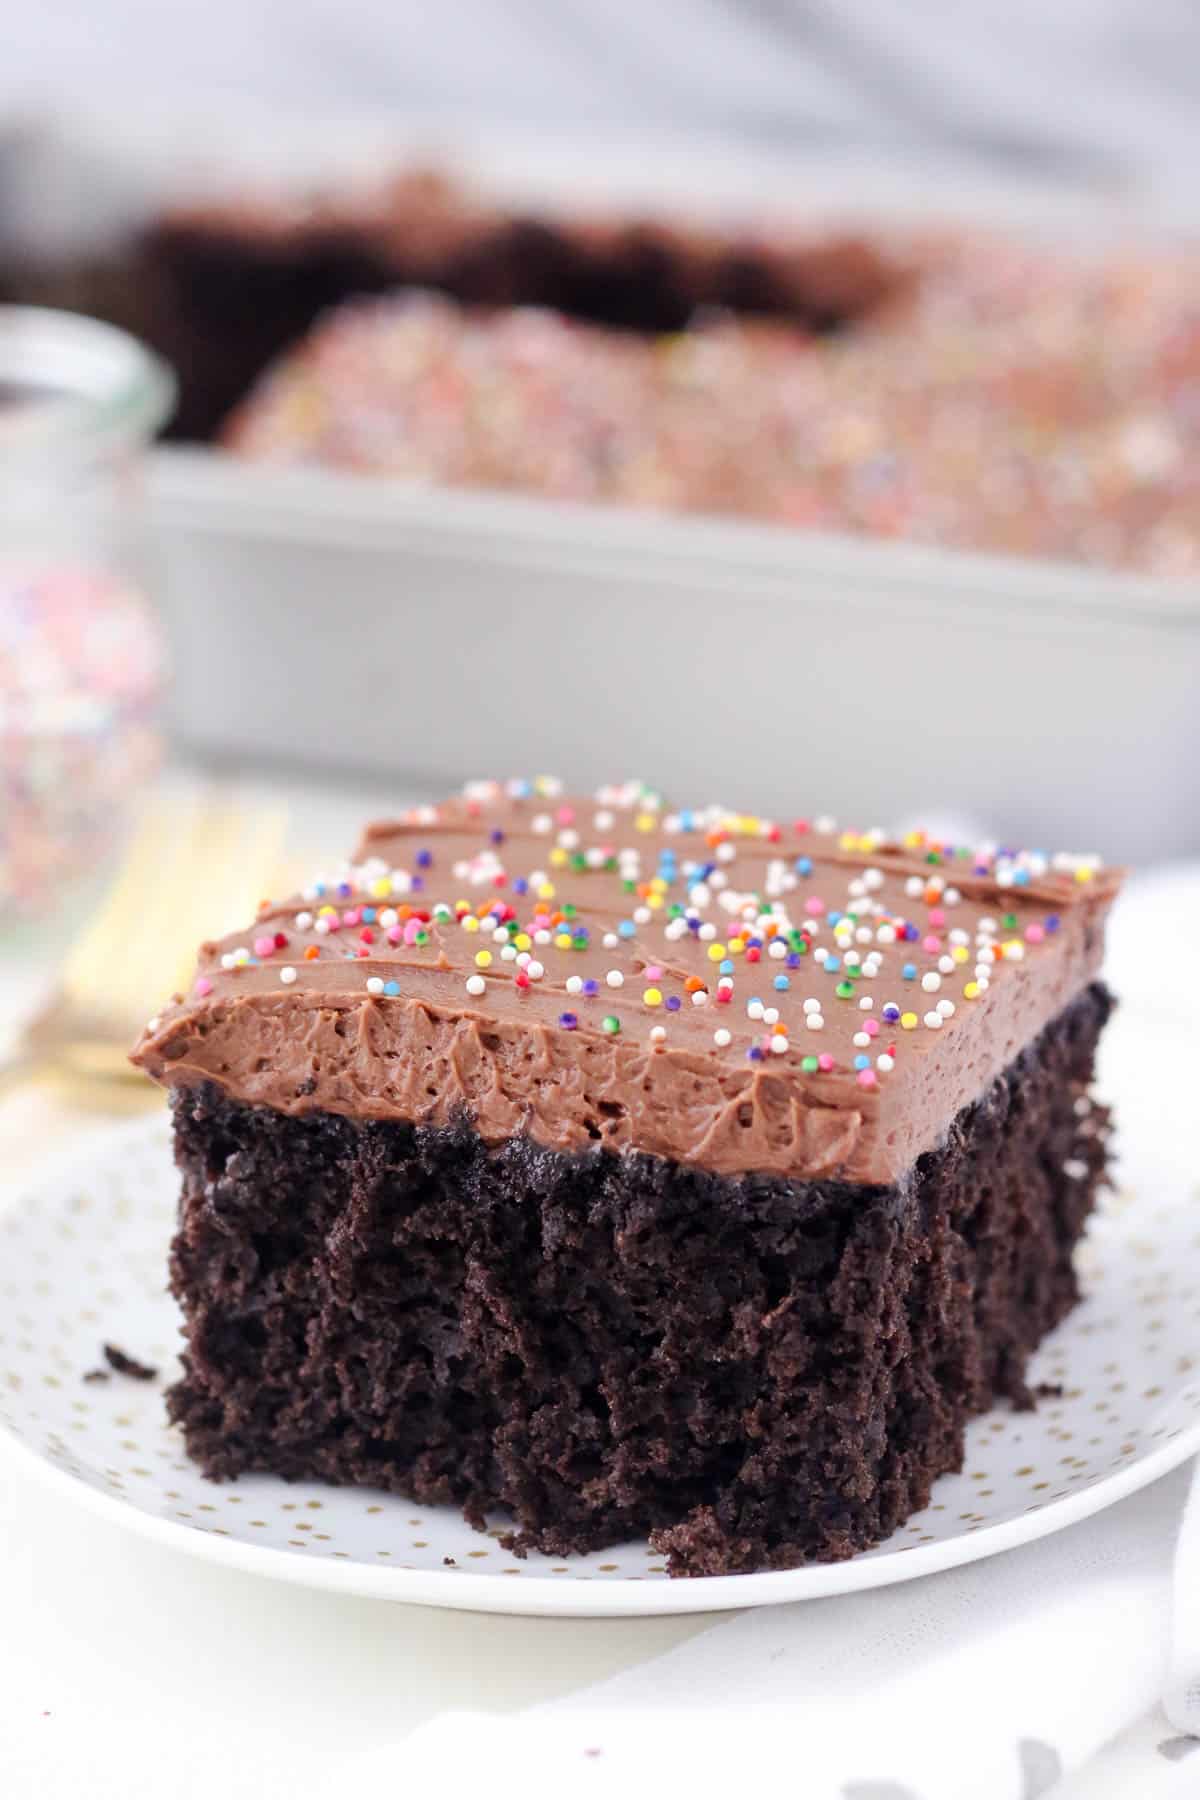 A slice of frosted chocolate cake topped with rainbow sprinkles on a white plate, with the remaining cake in a baking dish in the background.